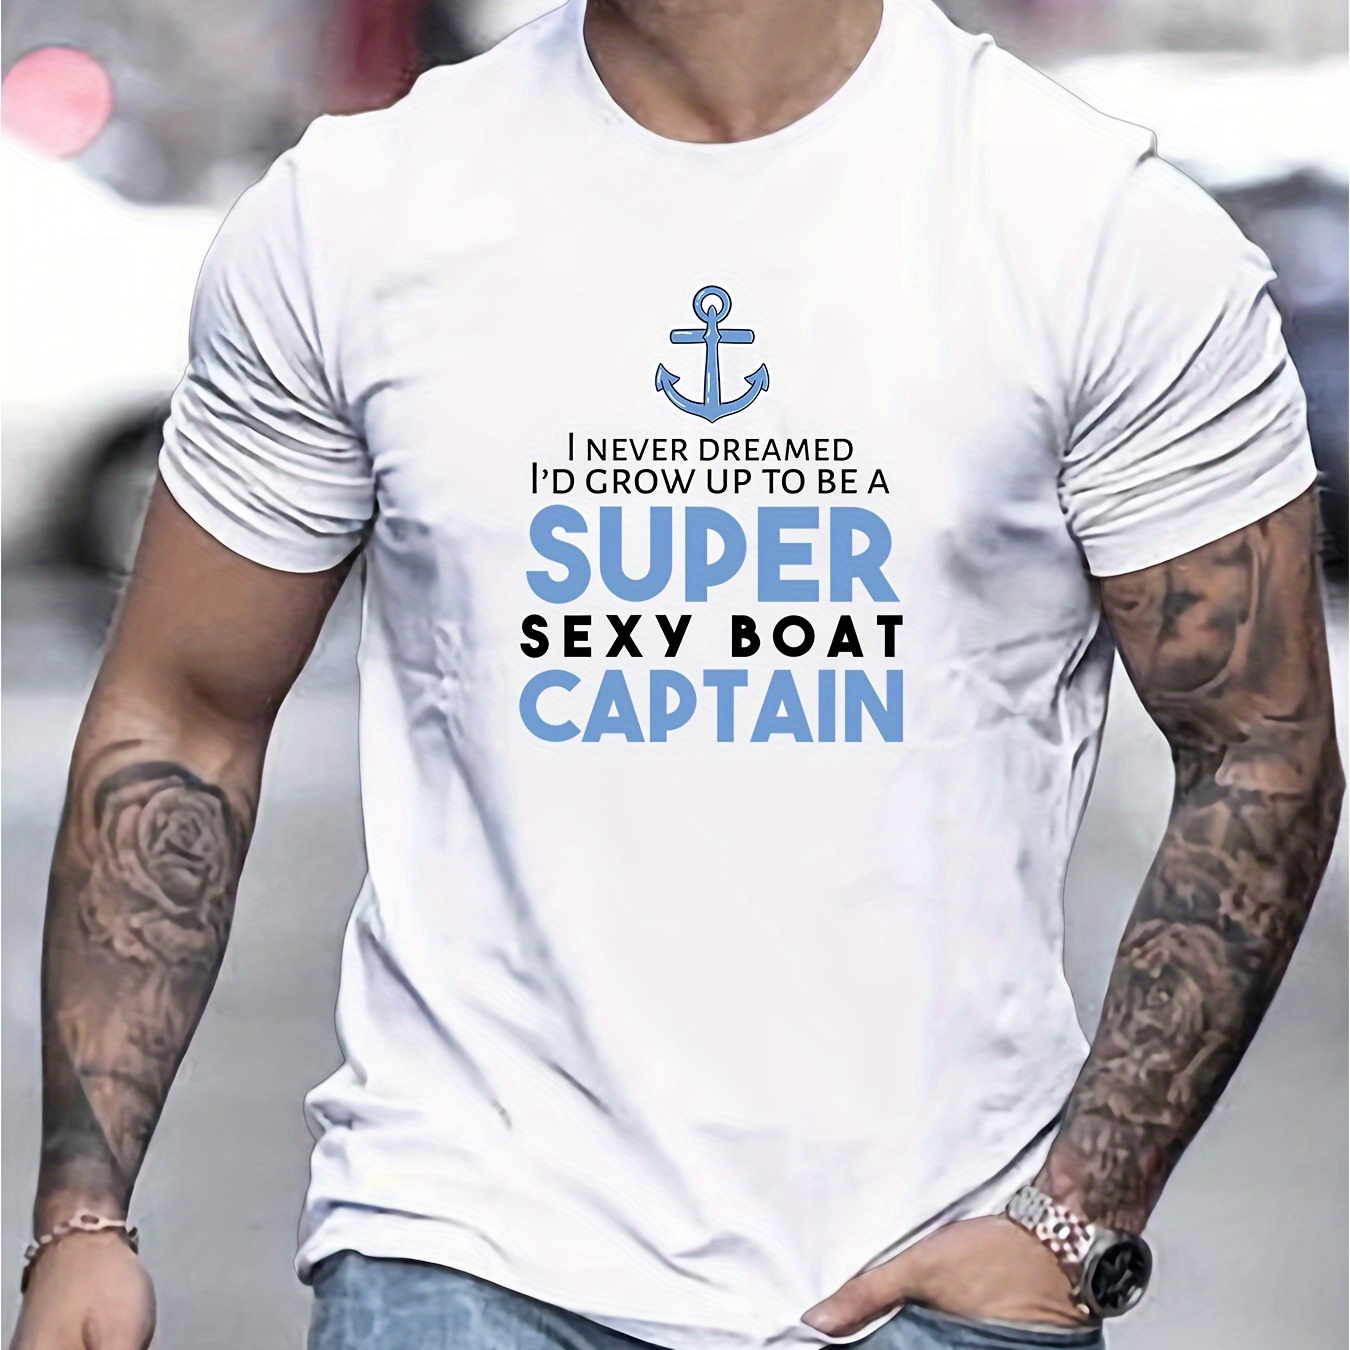 

Super Sexy Boat Captain Print Tee Shirt, Tees For Men, Casual Short Sleeve T-shirt For Summer